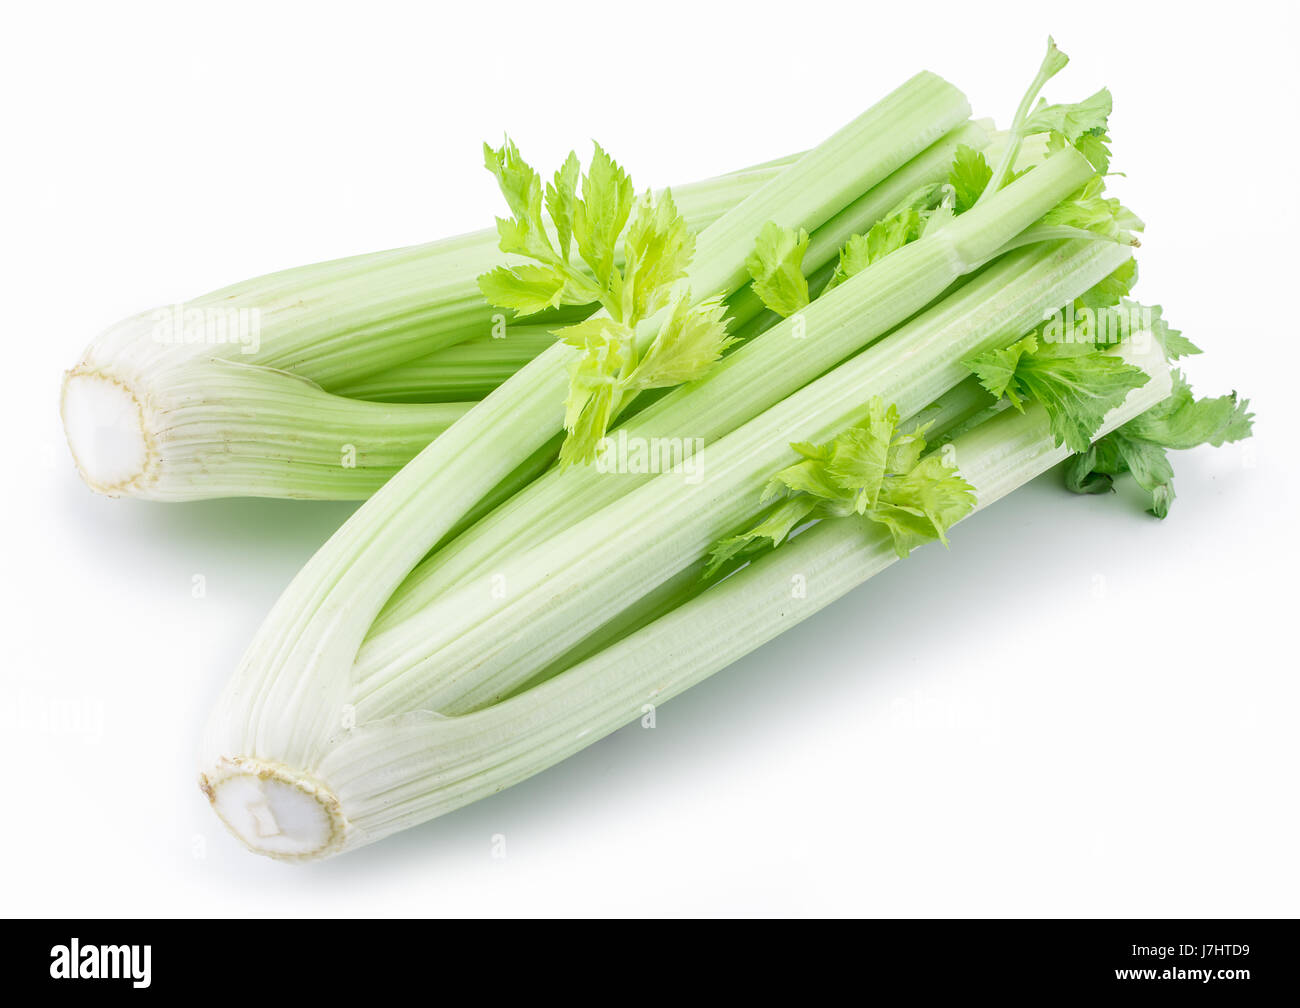 Fresh green leaf stalks of celery. Isolated on a white background. Stock Photo